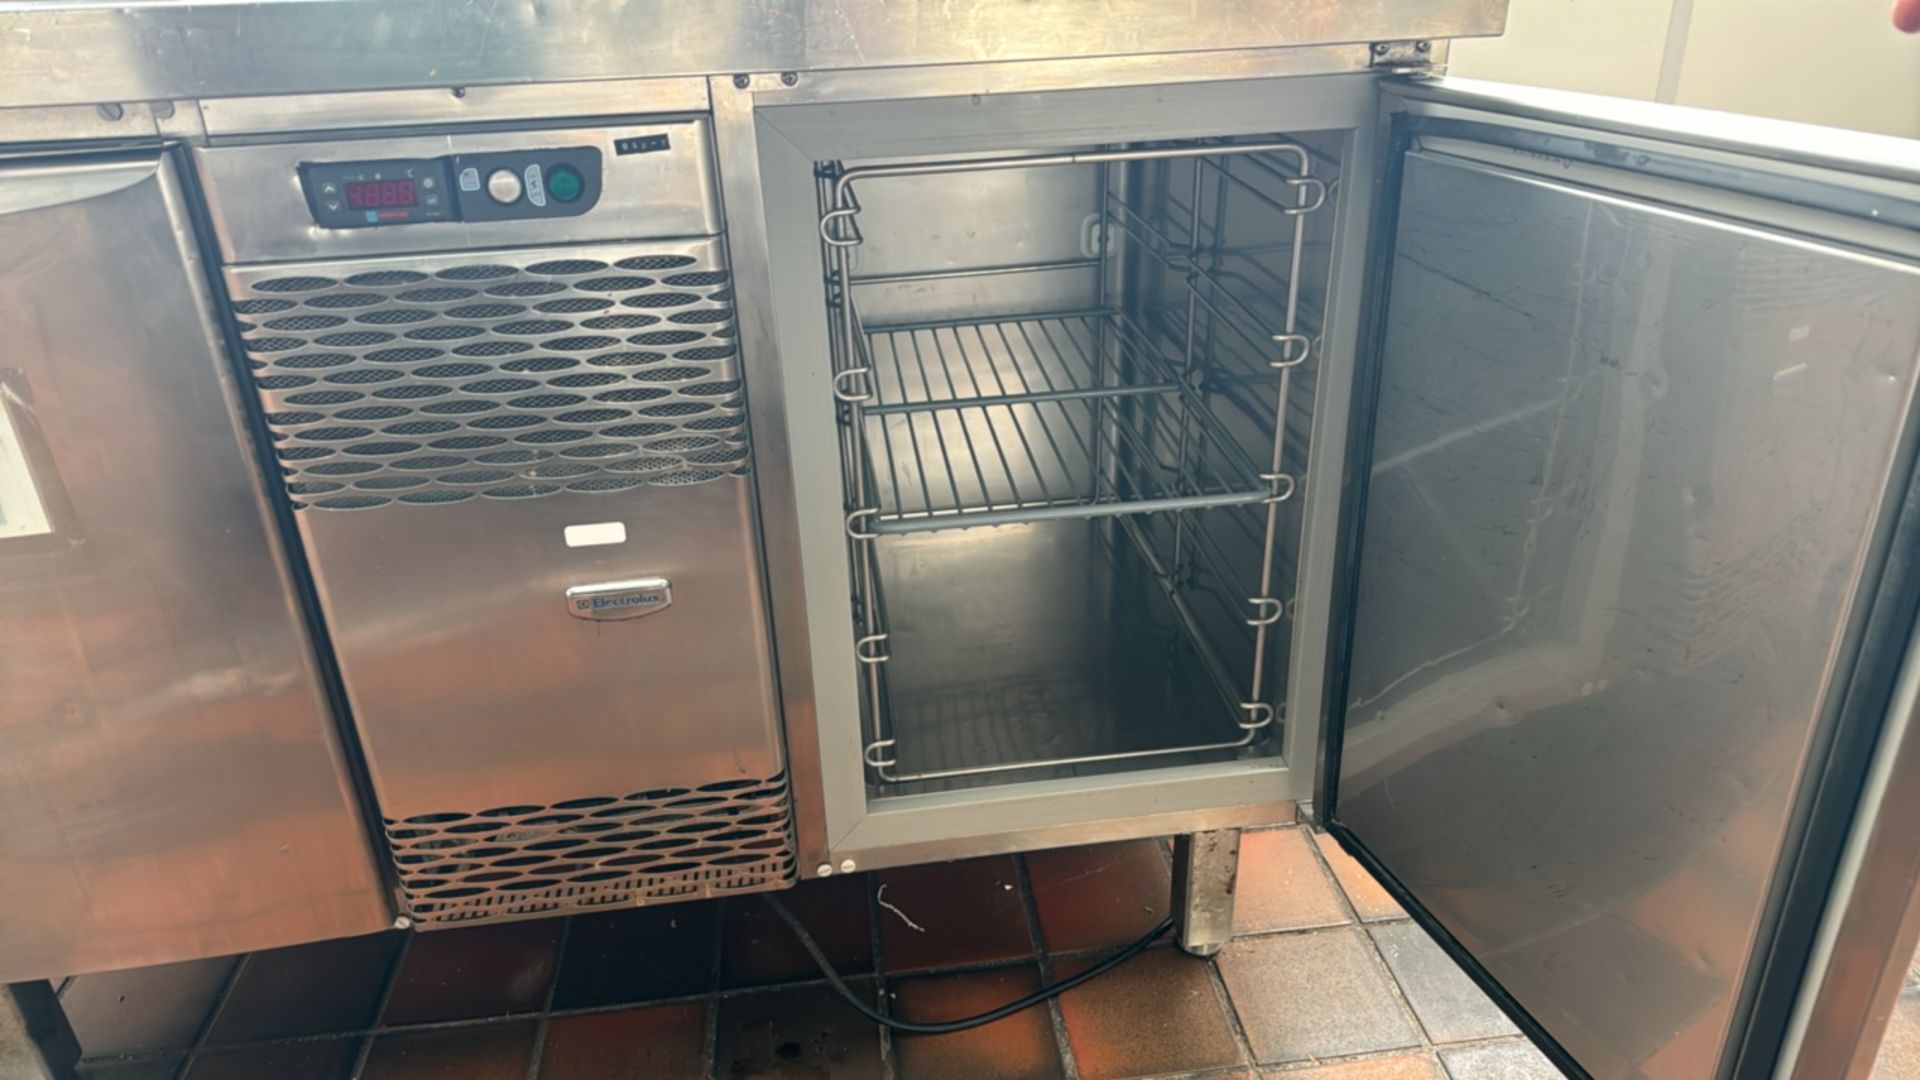 Electrolux Stainless Steel Preparation Unit With Under Counter Fridges - Image 5 of 6